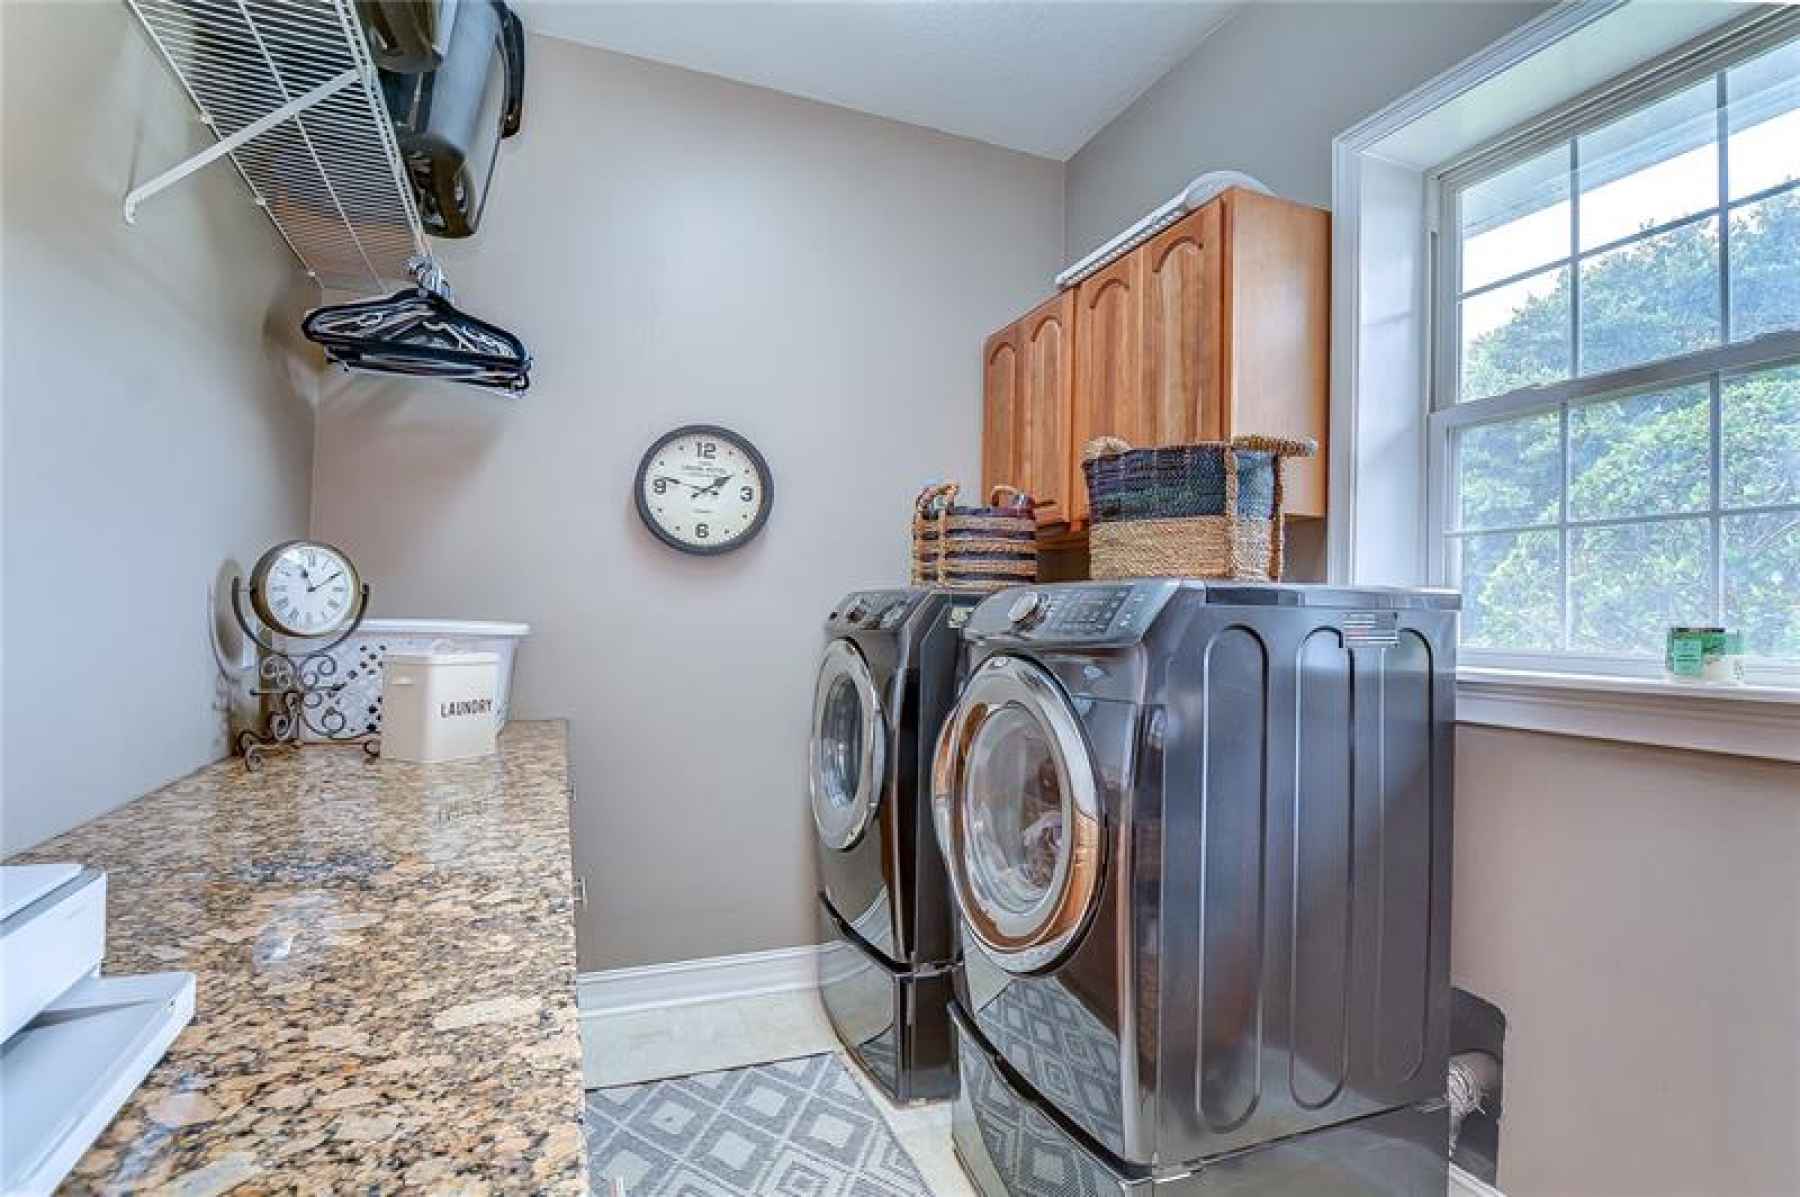 This laundry room features plenty of countertop space!